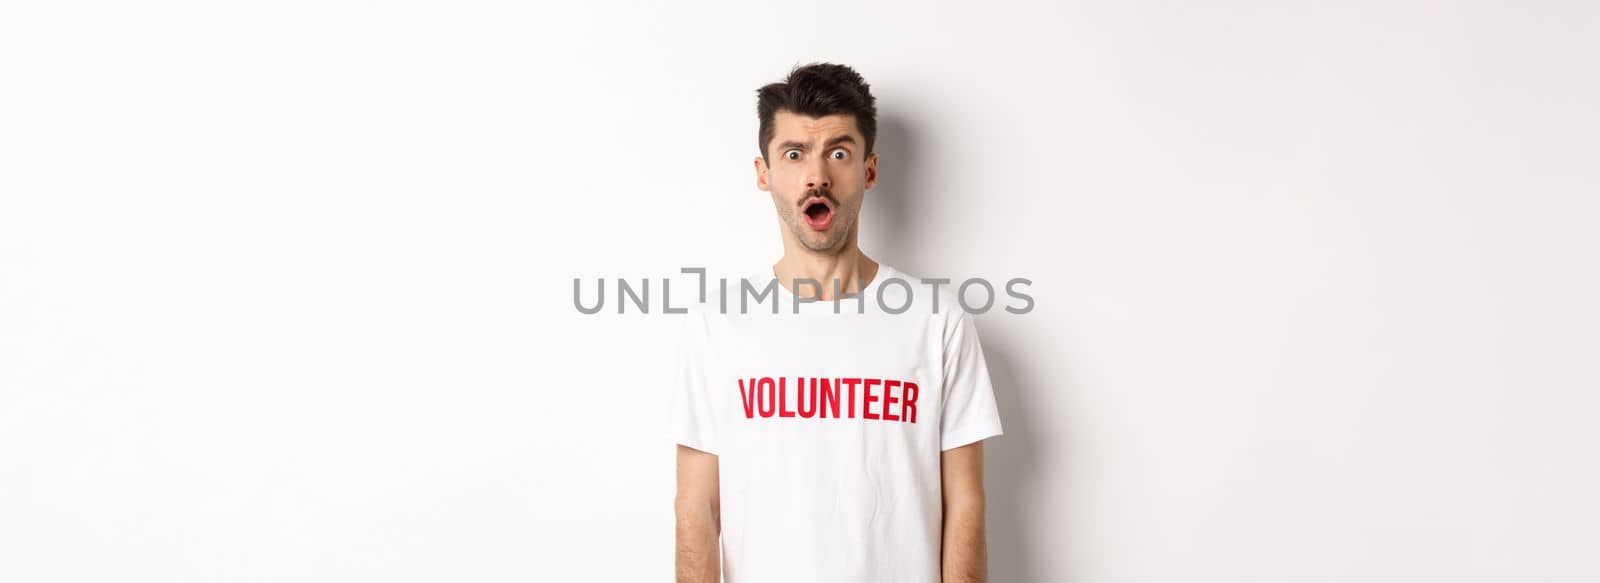 Shocked and confused man in volunteer t-shirt staring at camera speechless, standing against white background.